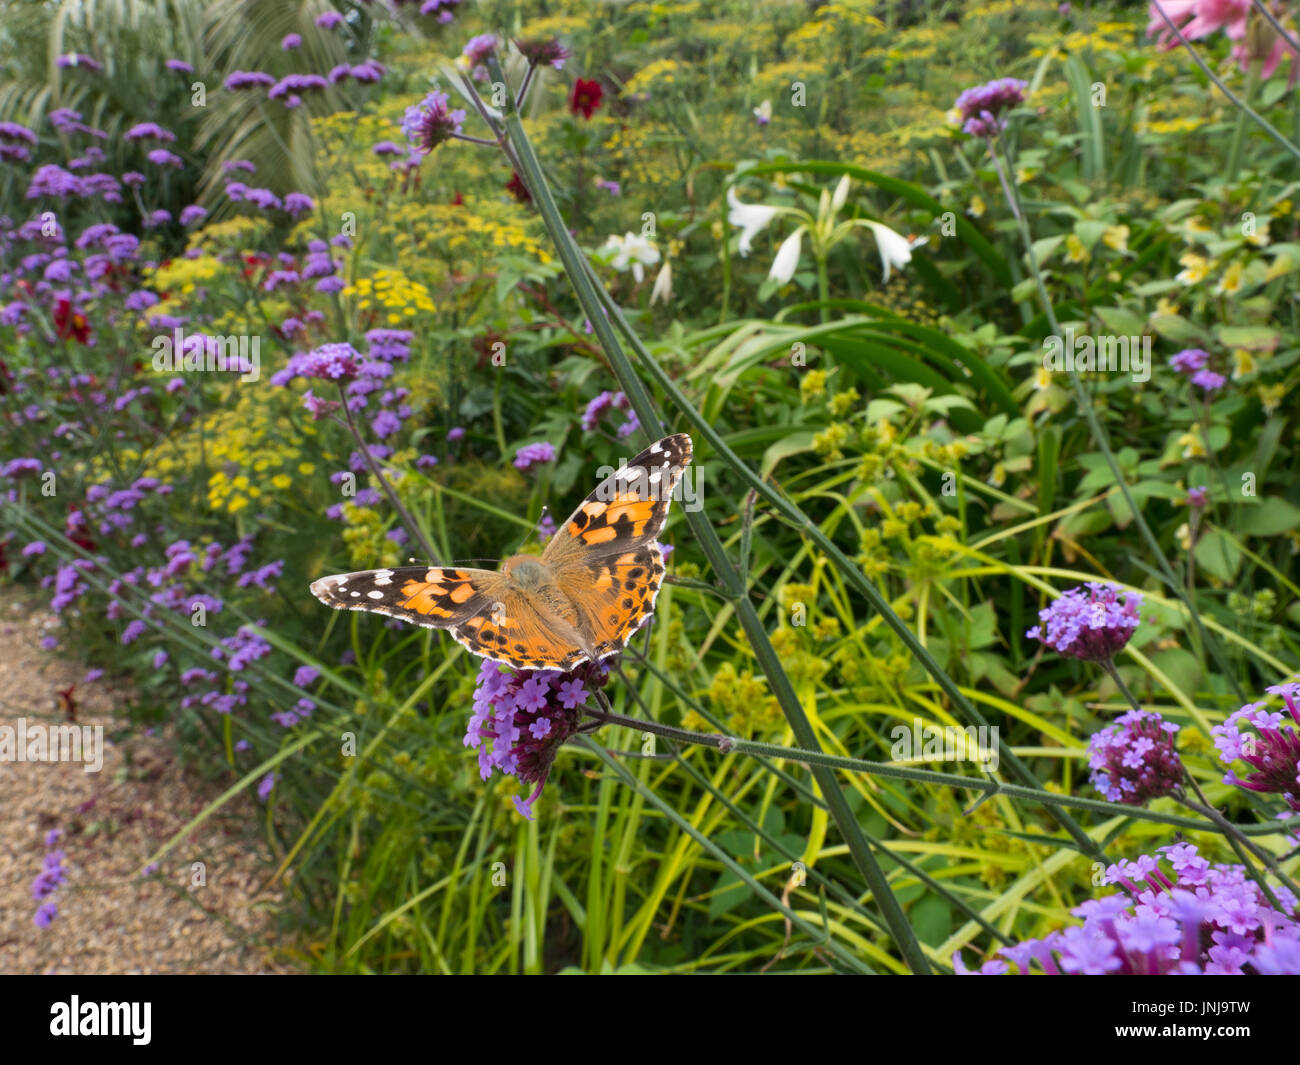 Painted Lady Butterfly on verbena bonariensis in garden setting Stock Photo